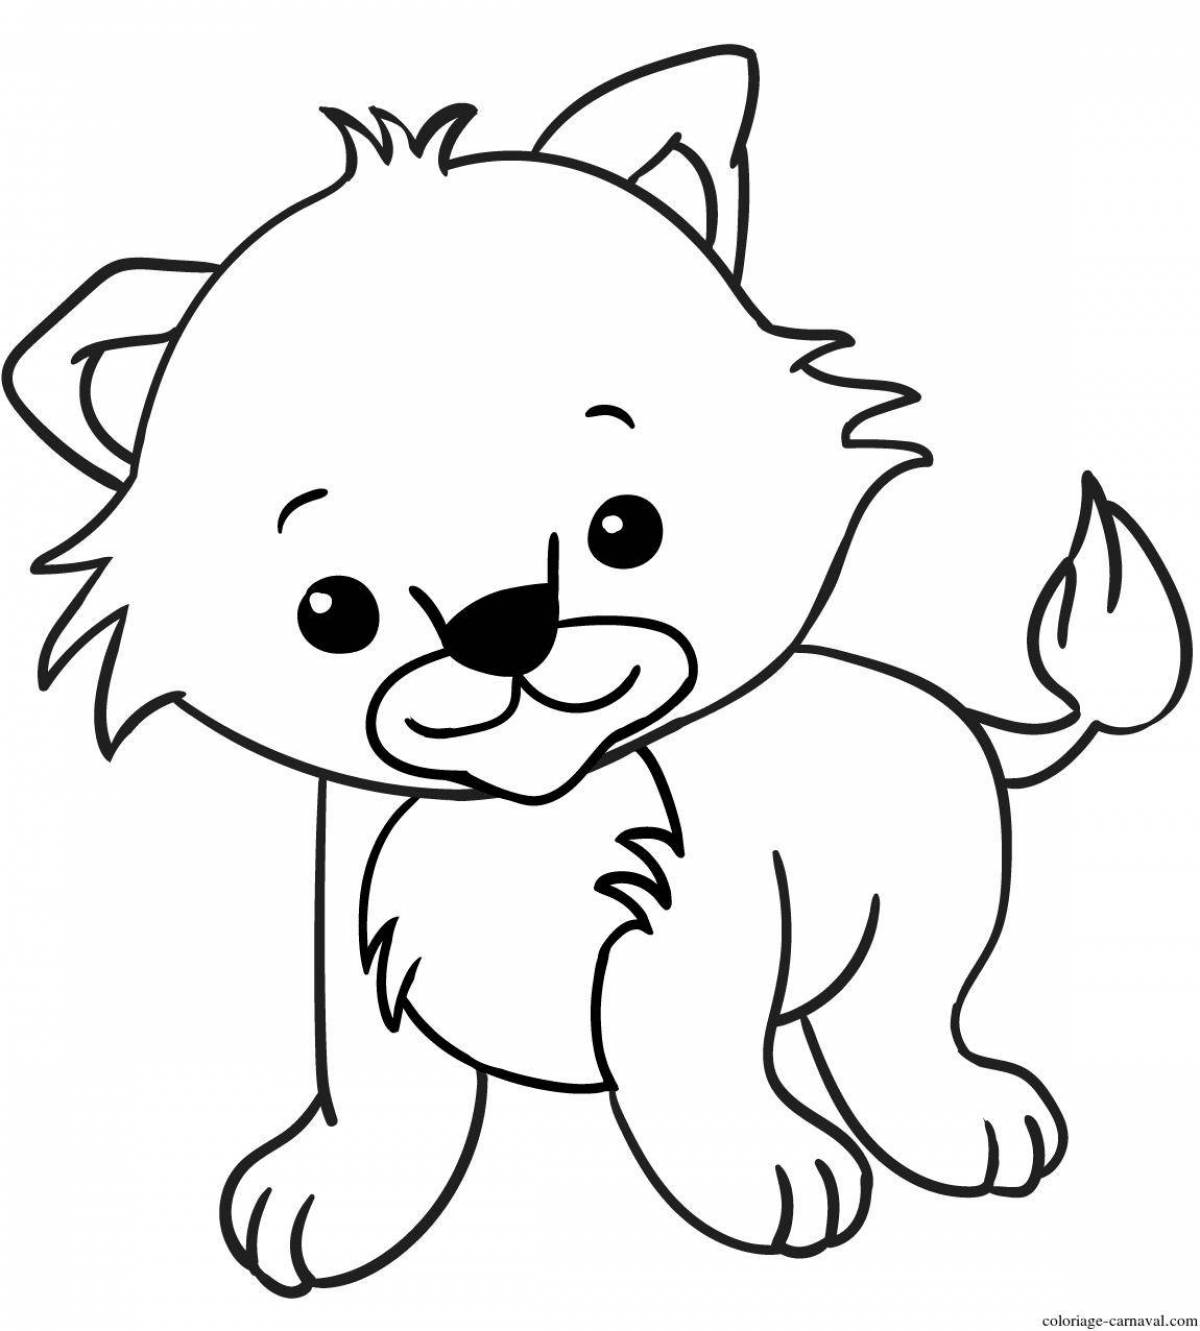 Fun coloring pages with cute animals for kids